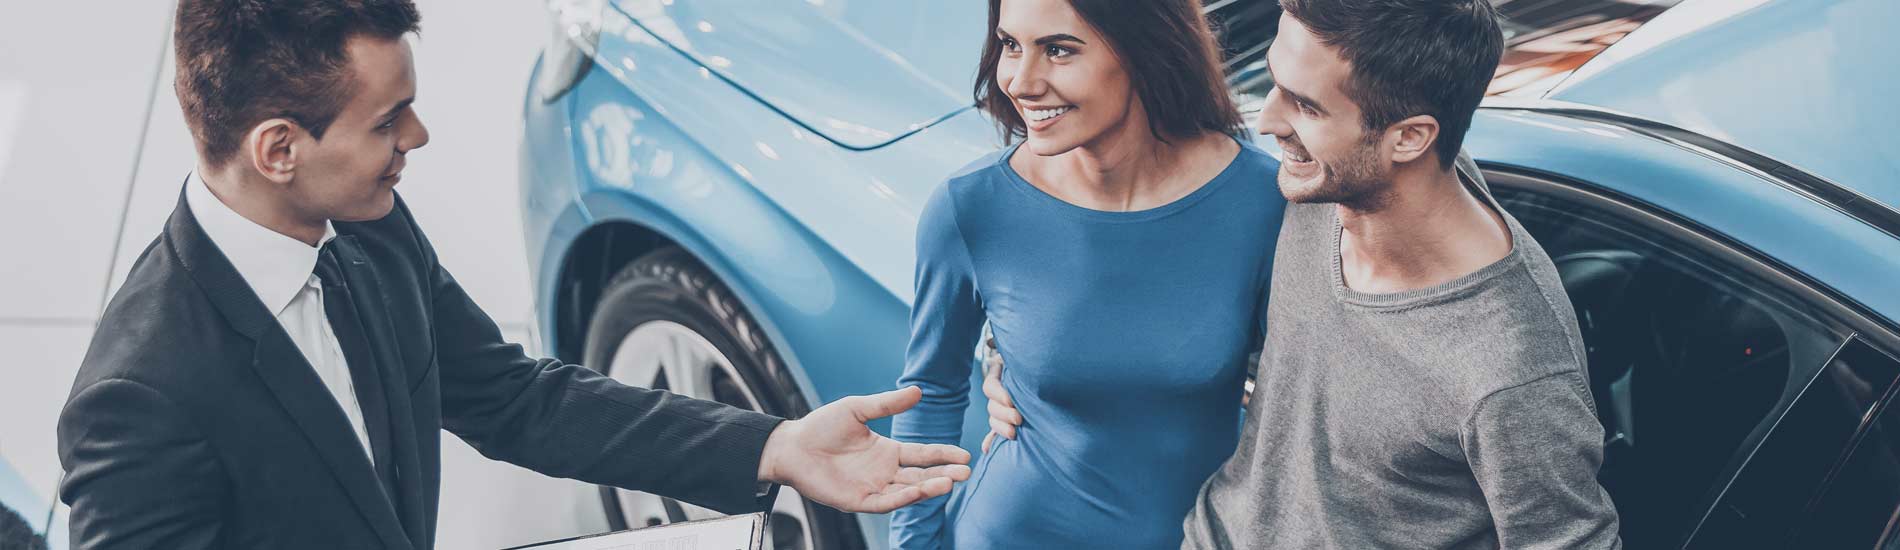 Questions to ask at the dealership